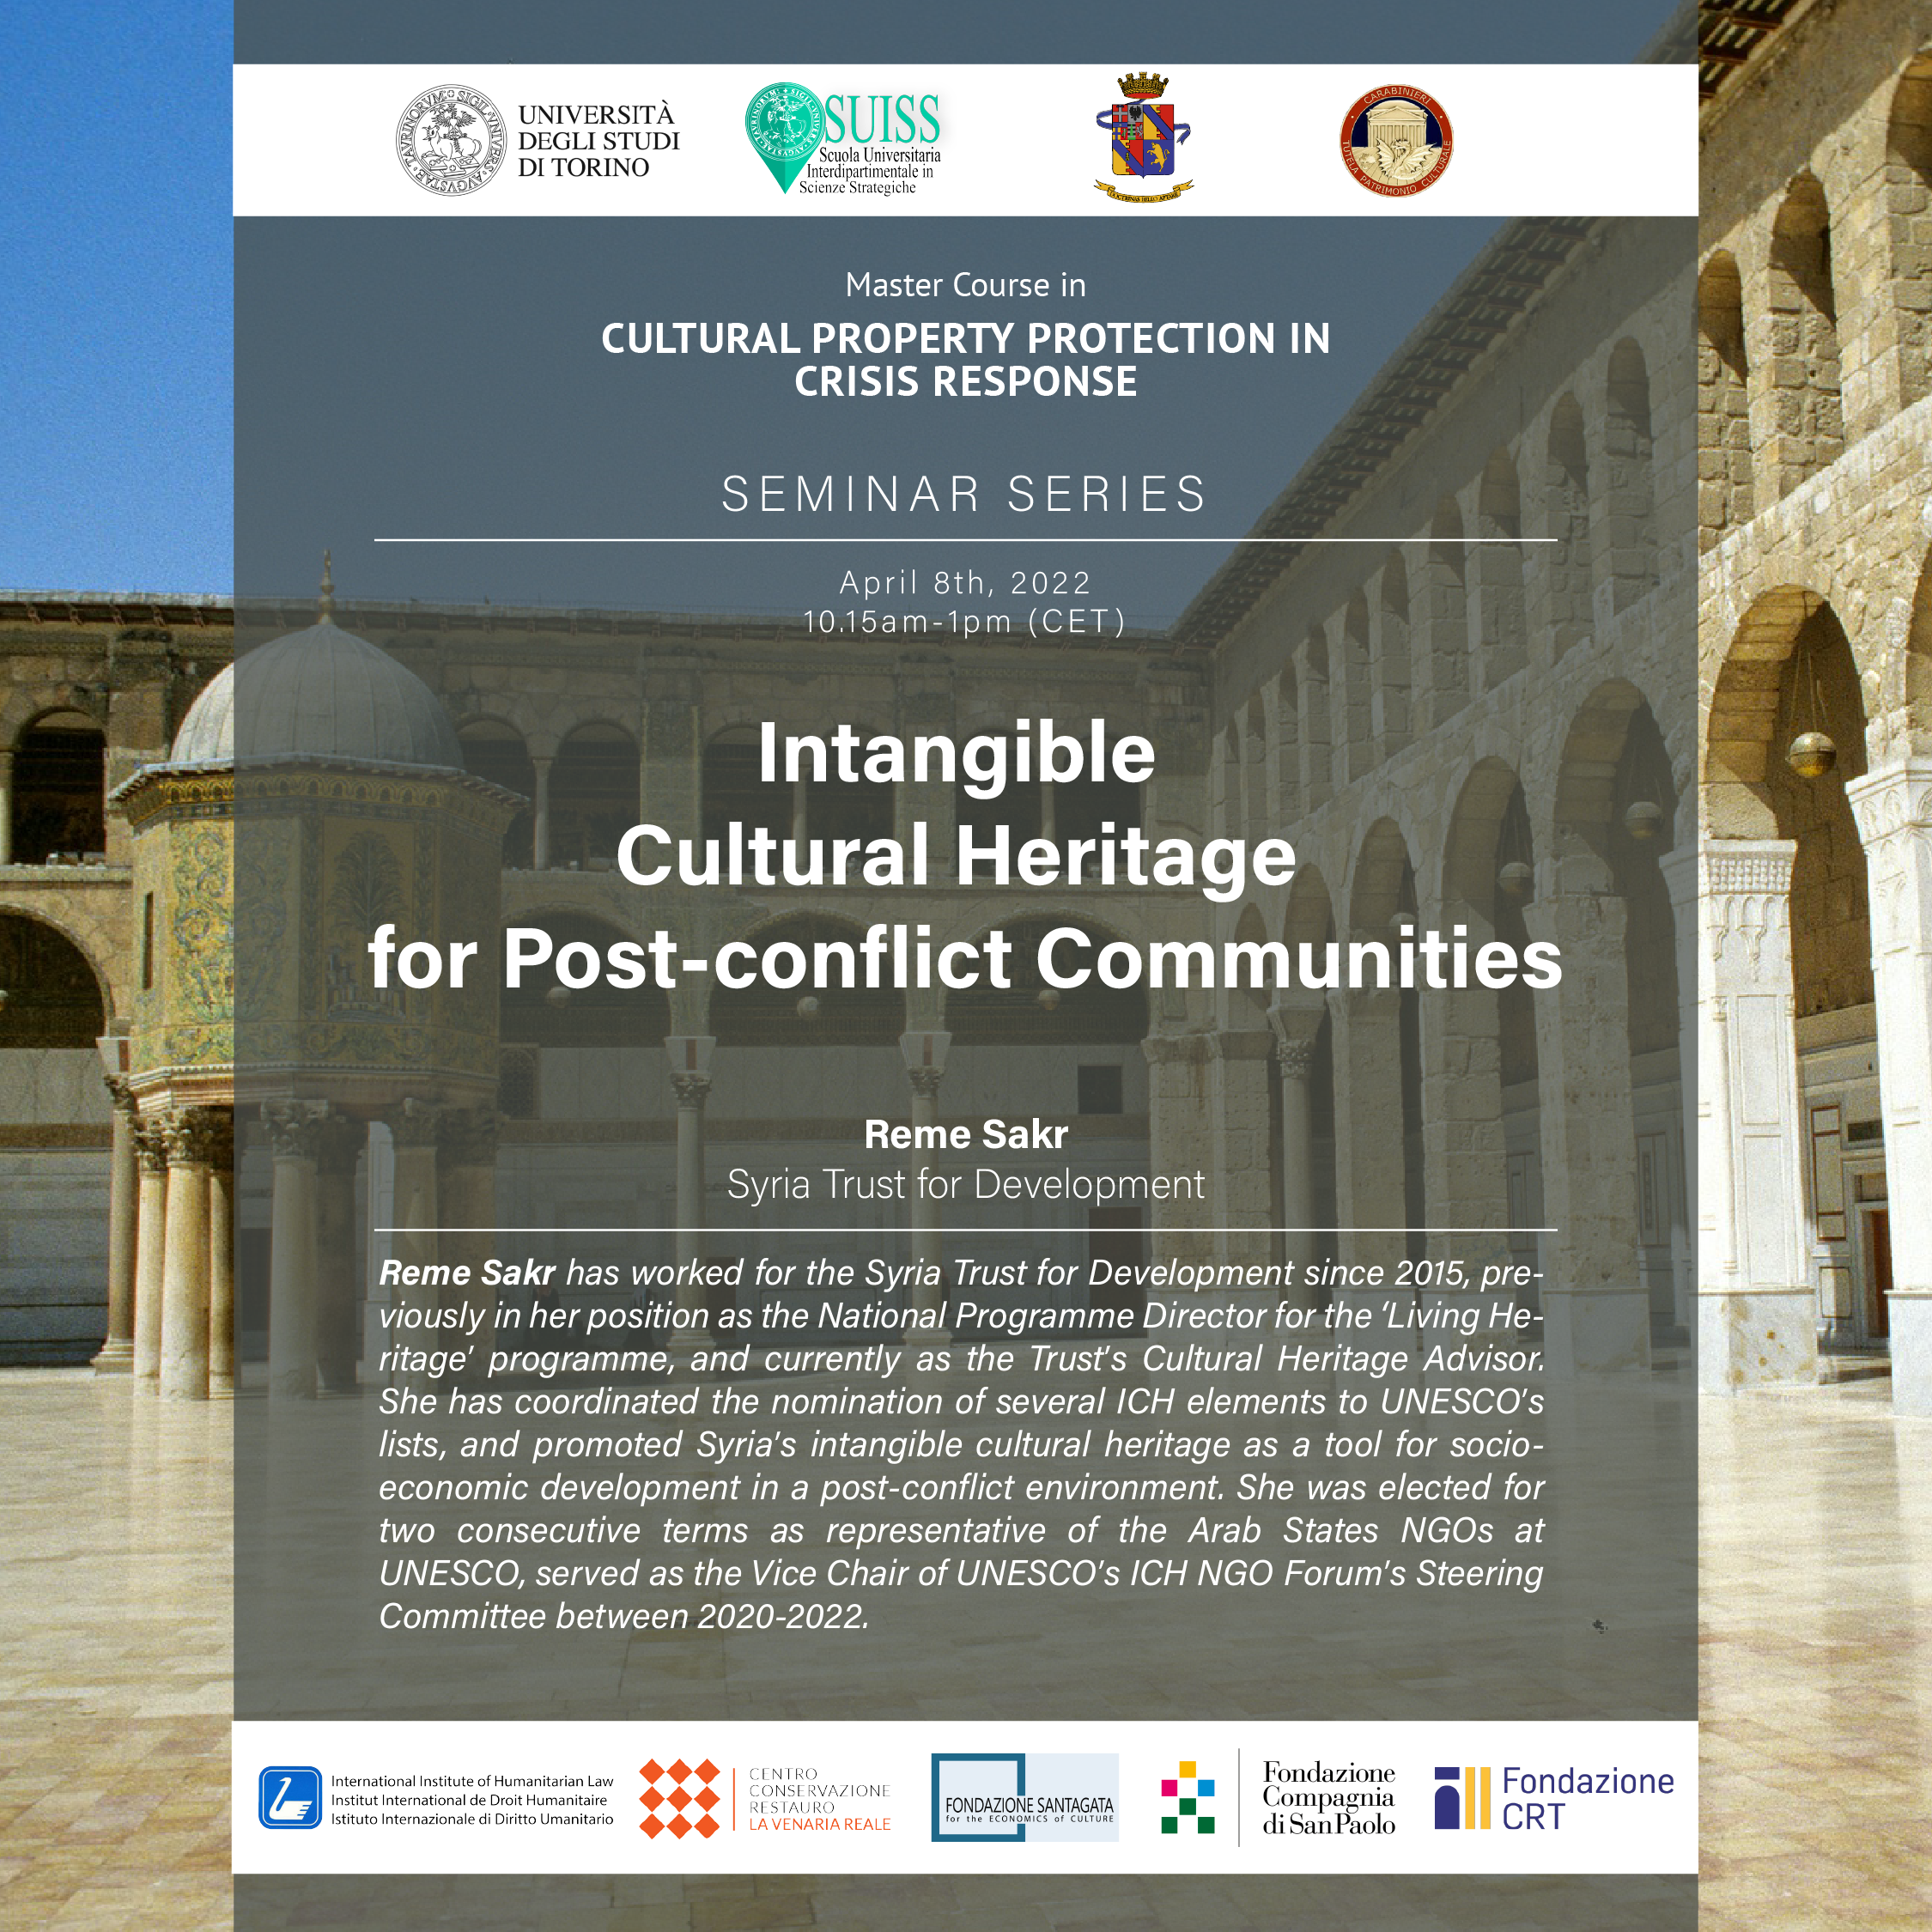 Intangible Cultural Heritage for Post-Conflict Communities